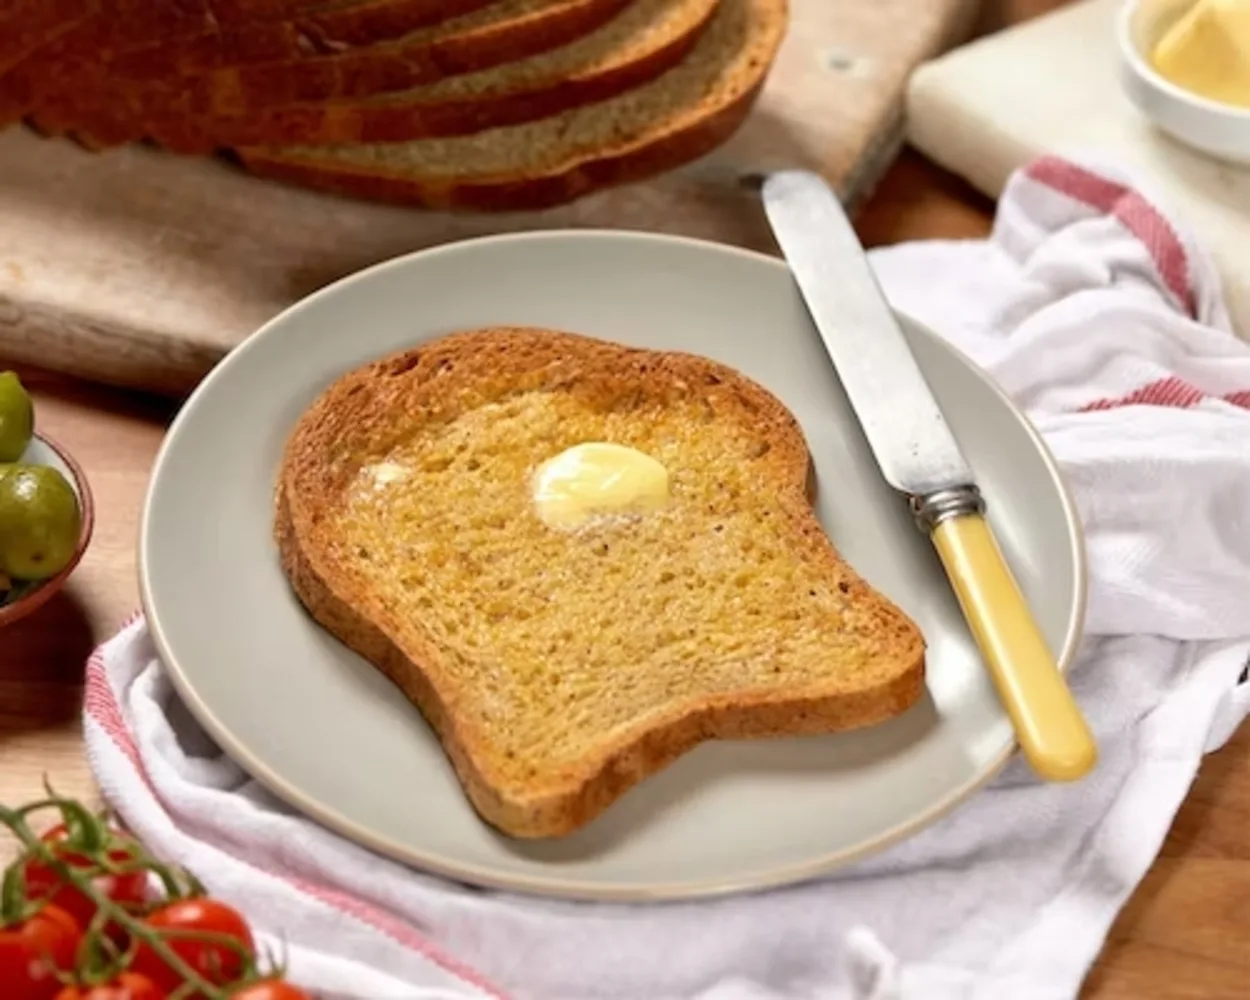 Butter on the top of a toast!